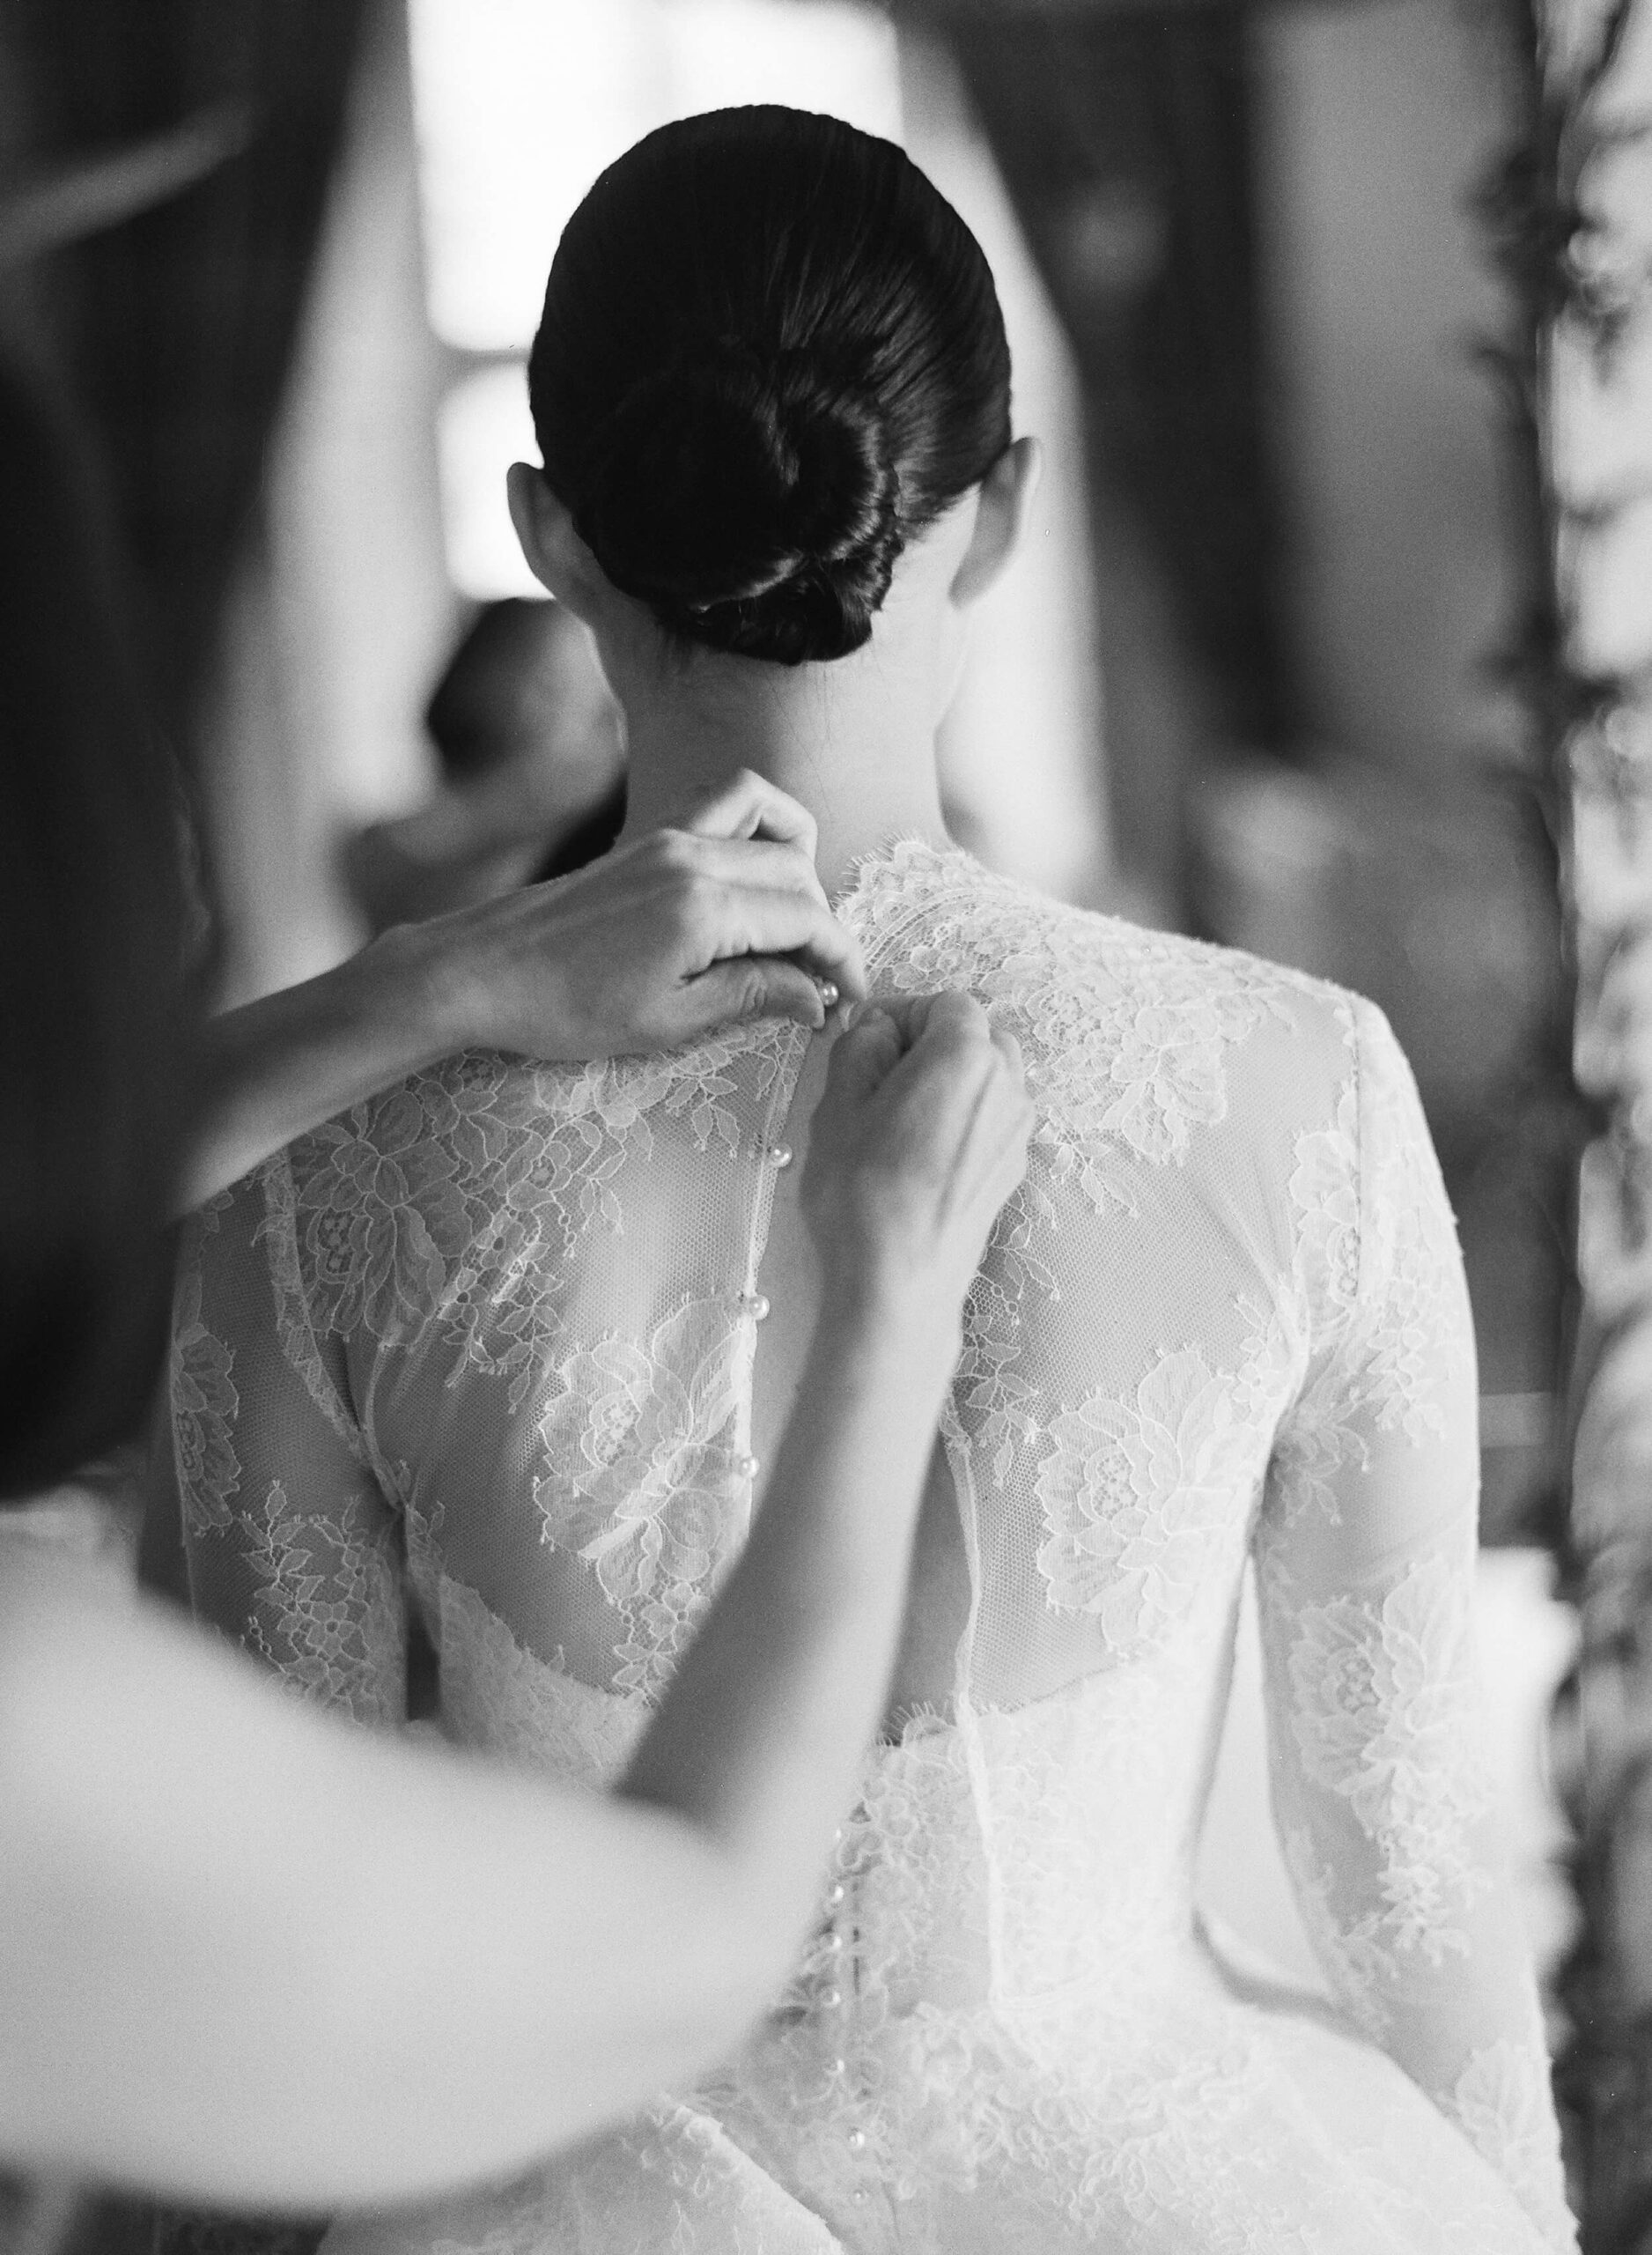 family member carefully buttons the elegantly laced wedding gown